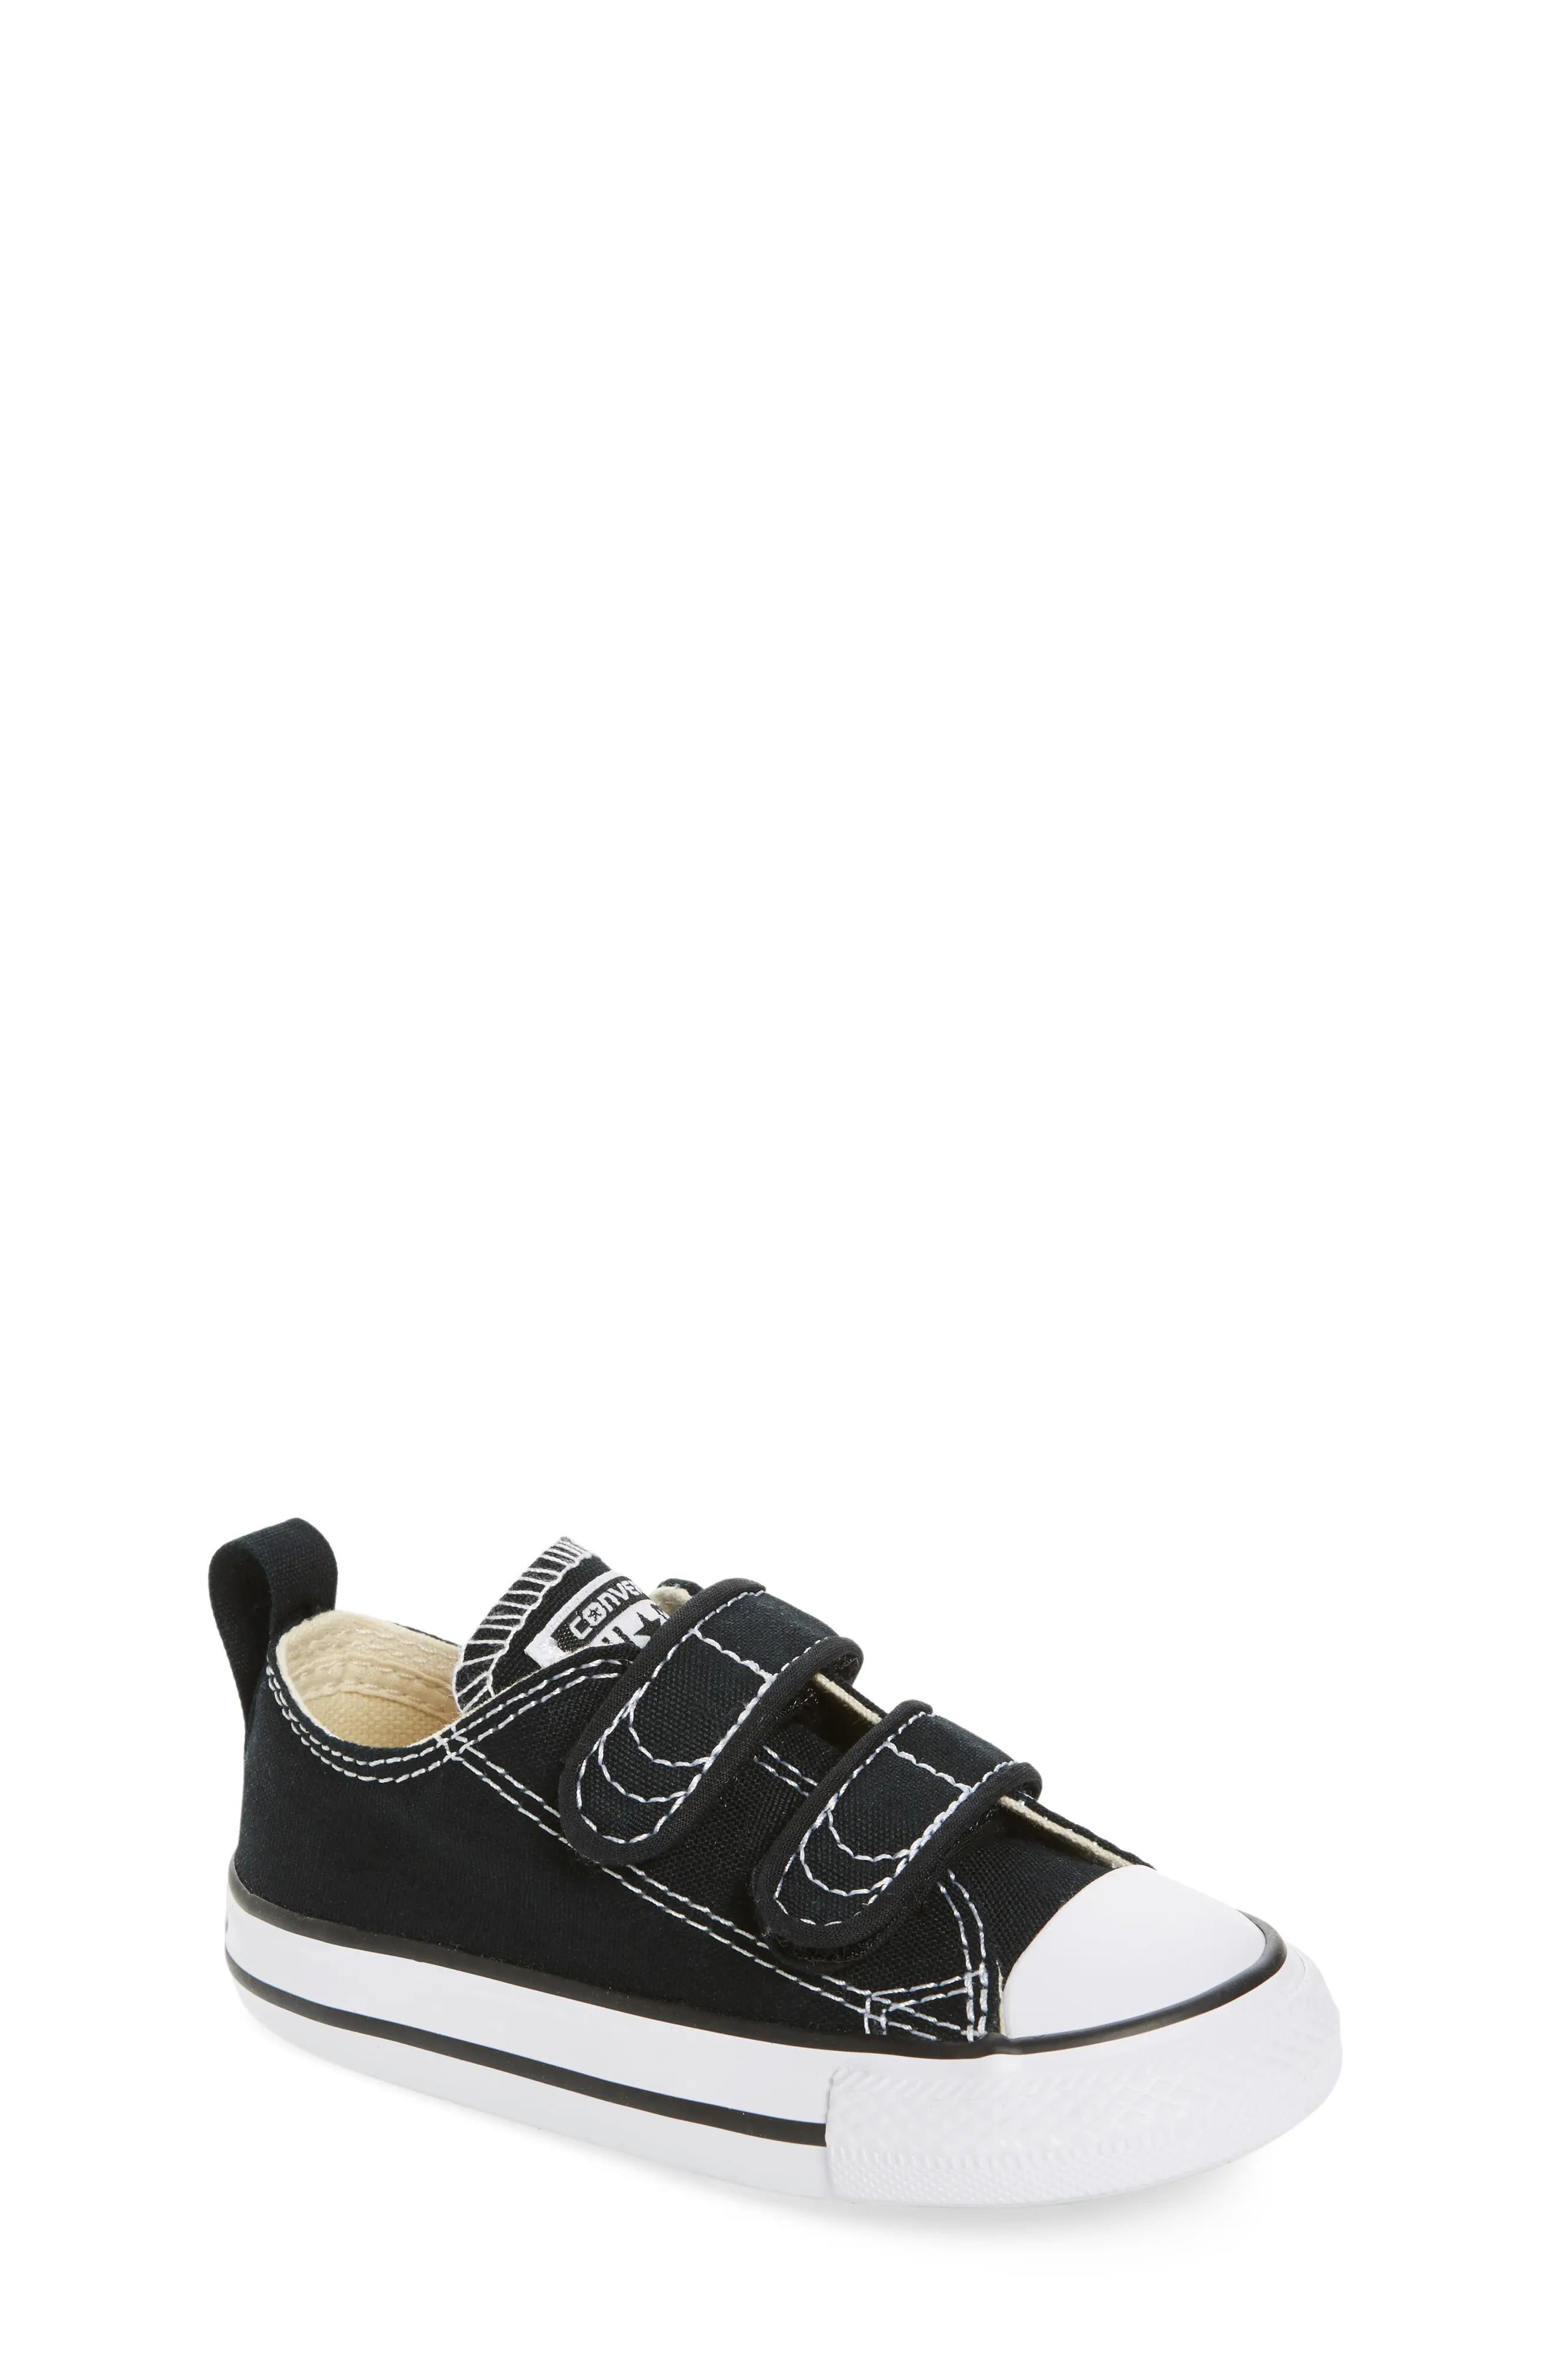 Toddler Converse Chuck Taylor Double Strap Sneaker, Size 5 M - Black | Nordstrom